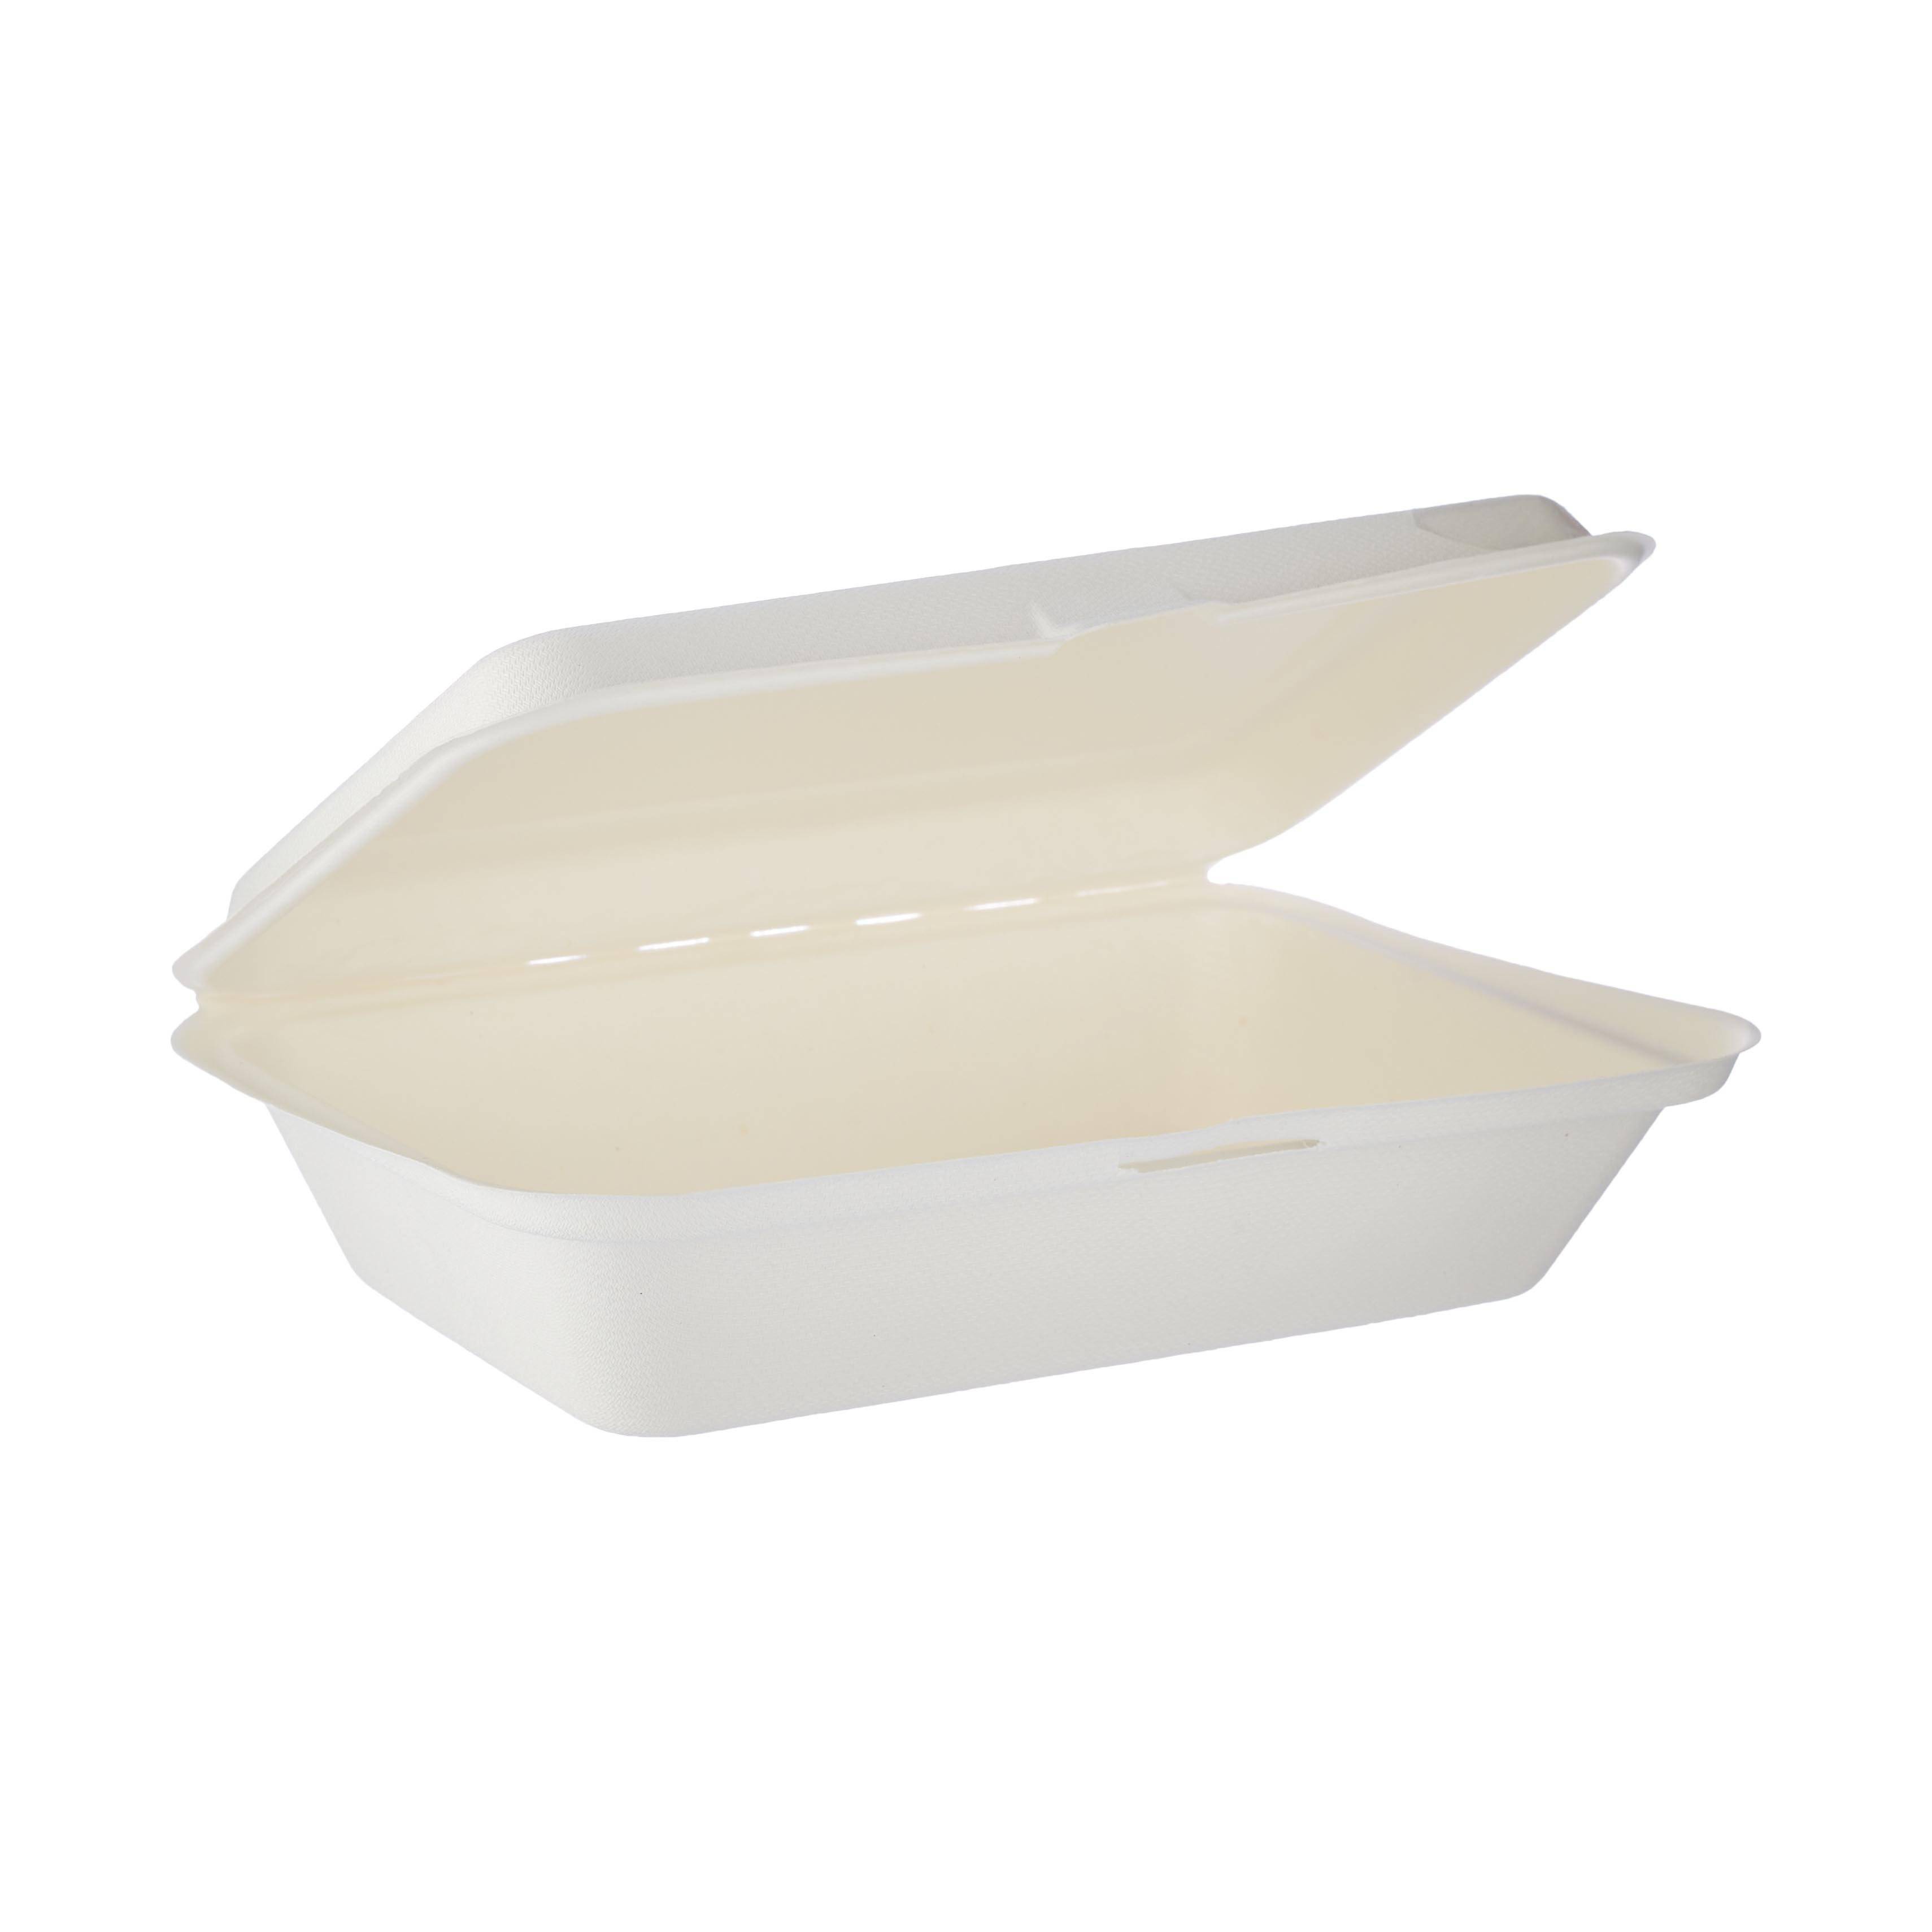 Bio-Degradable Hinged Container 9x6 Inch 500 Pieces - Hotpack Global